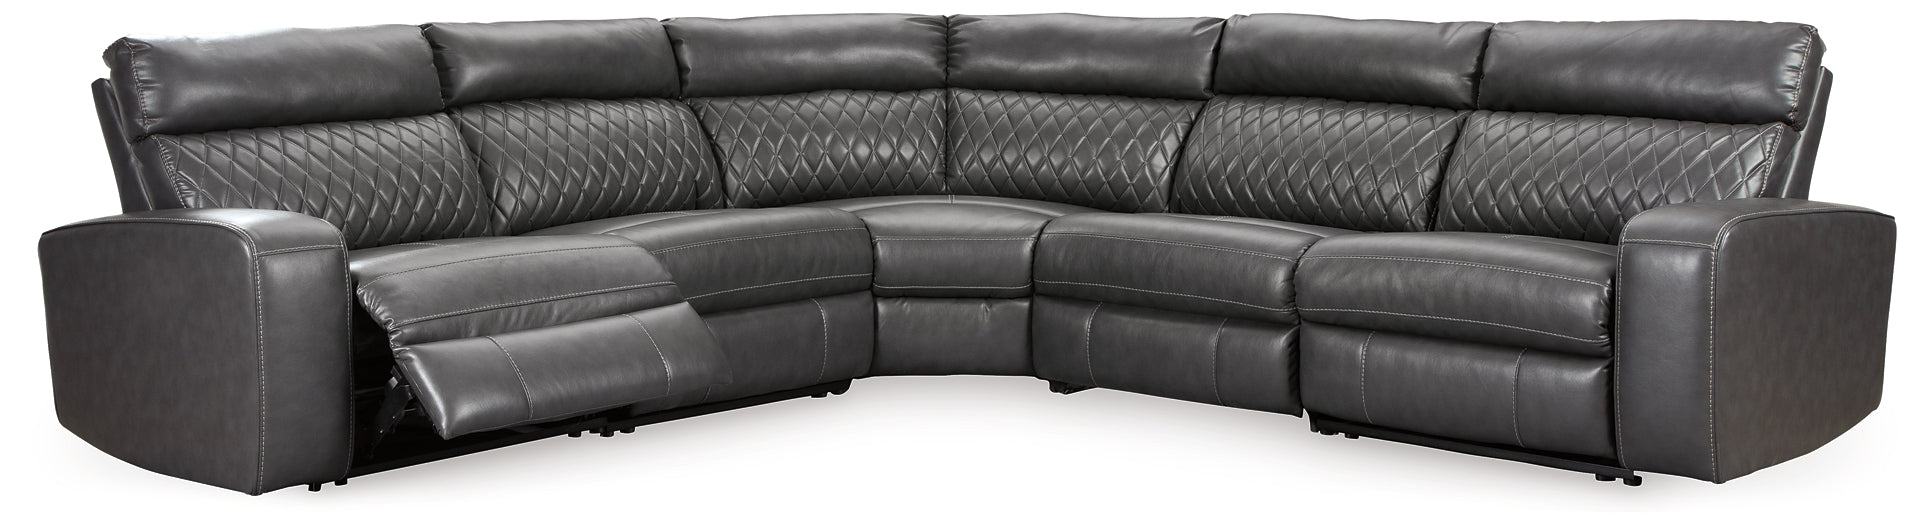 Samperstone 5-Piece Power Reclining Sectional Smyrna Furniture Outlet